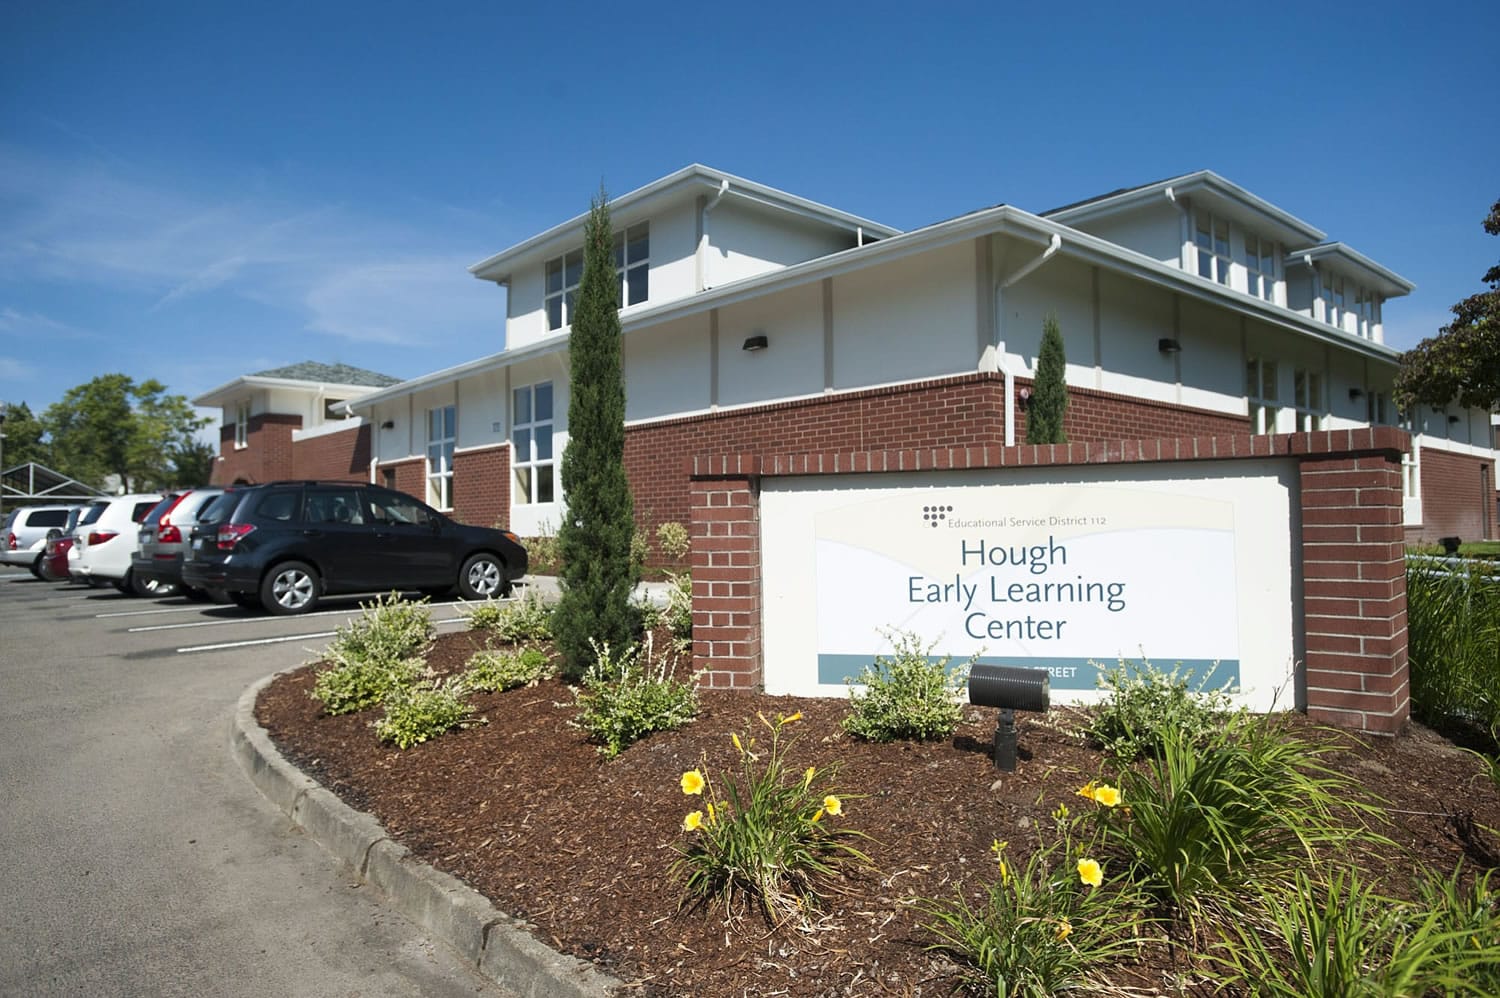 The new Hough Early Learning Center will host a public open house at 10 a.m. Friday. The former Hough Pool has been renovated by Educational Services District 112.